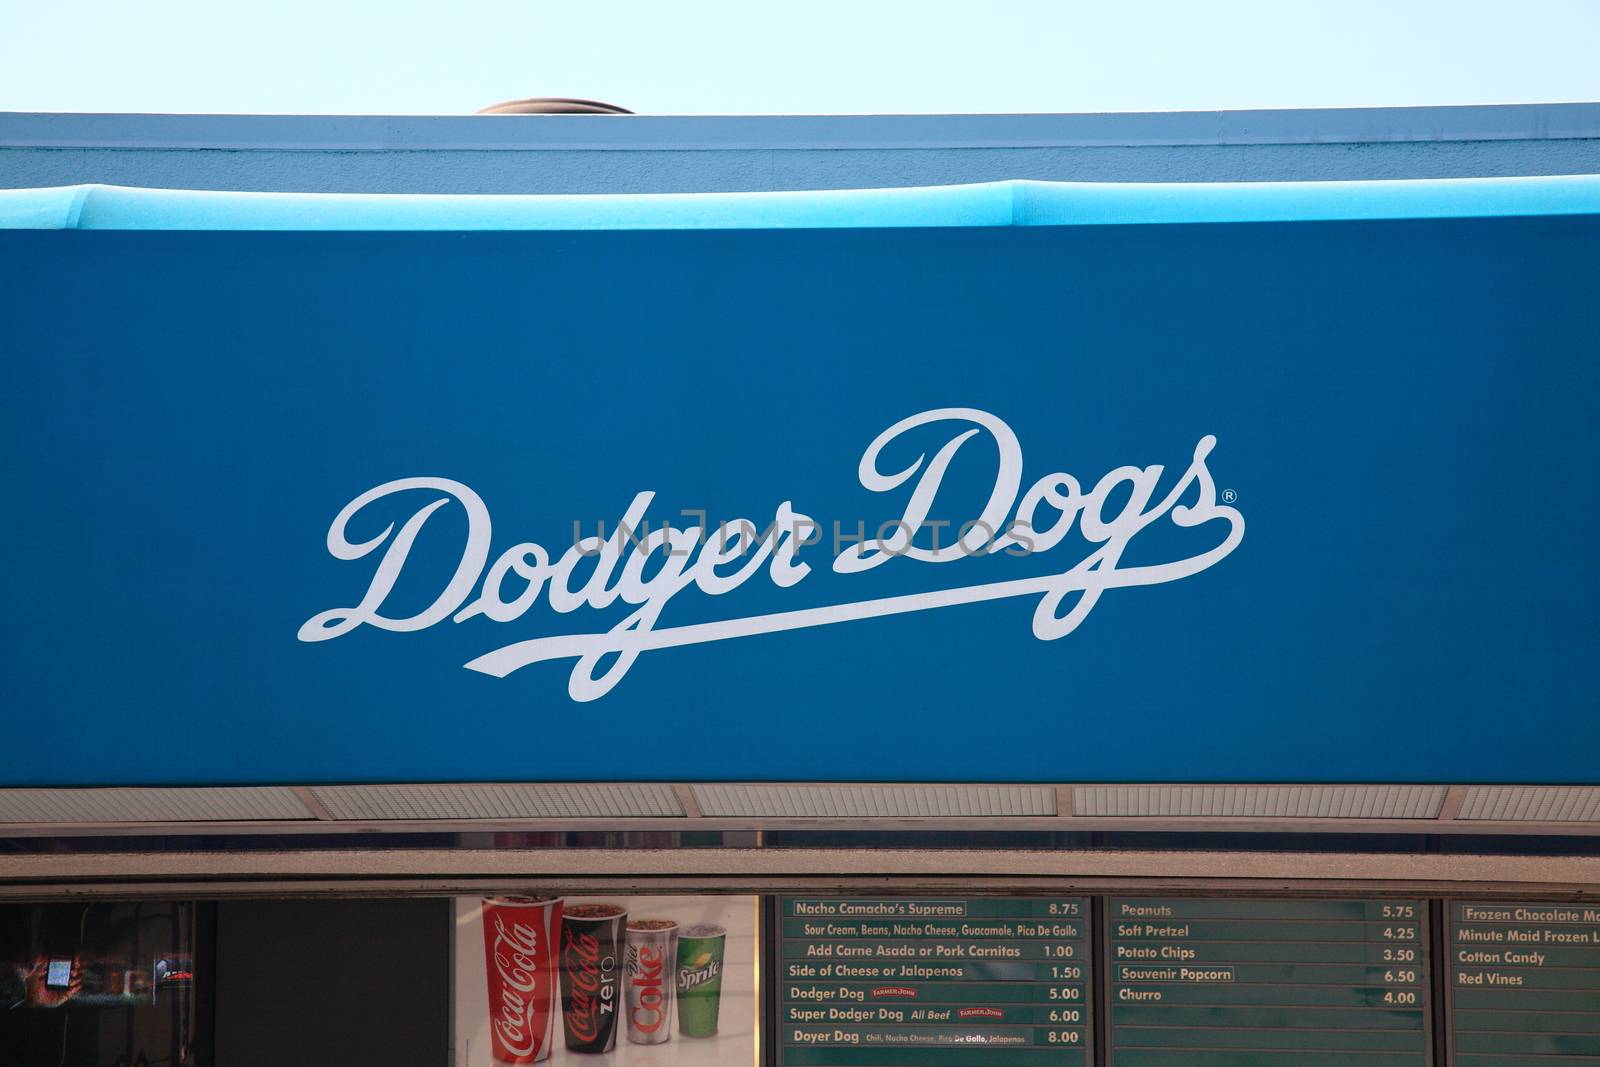 Famous Los Angeles Dodger Dog hot dog concession at the stadium.